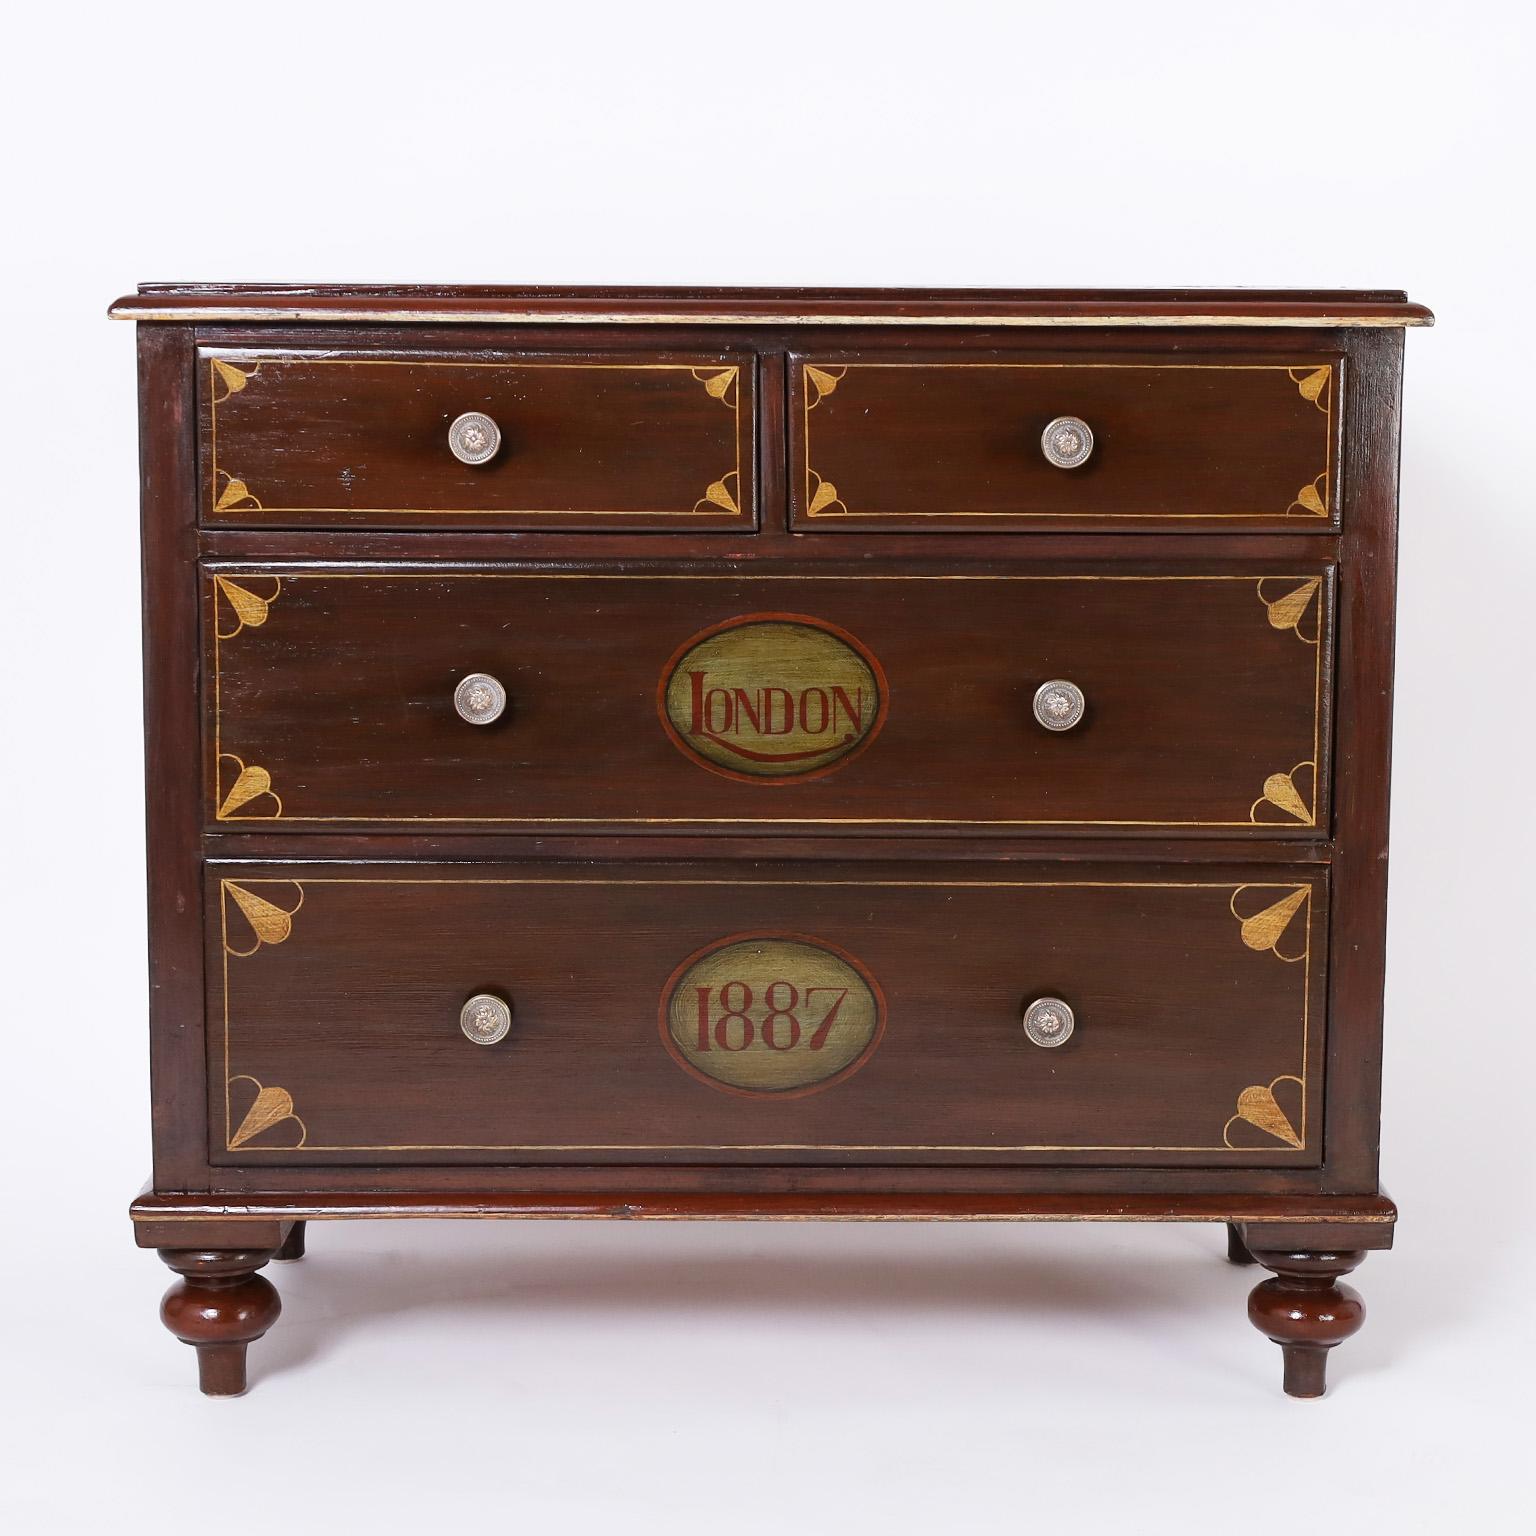 Standout antique English chest hand crafted in pine with four drawers and turned feet, painted and decorated later. Likely from the Cafe Royal Hotel London, which had its contents auctioned off in 1979.